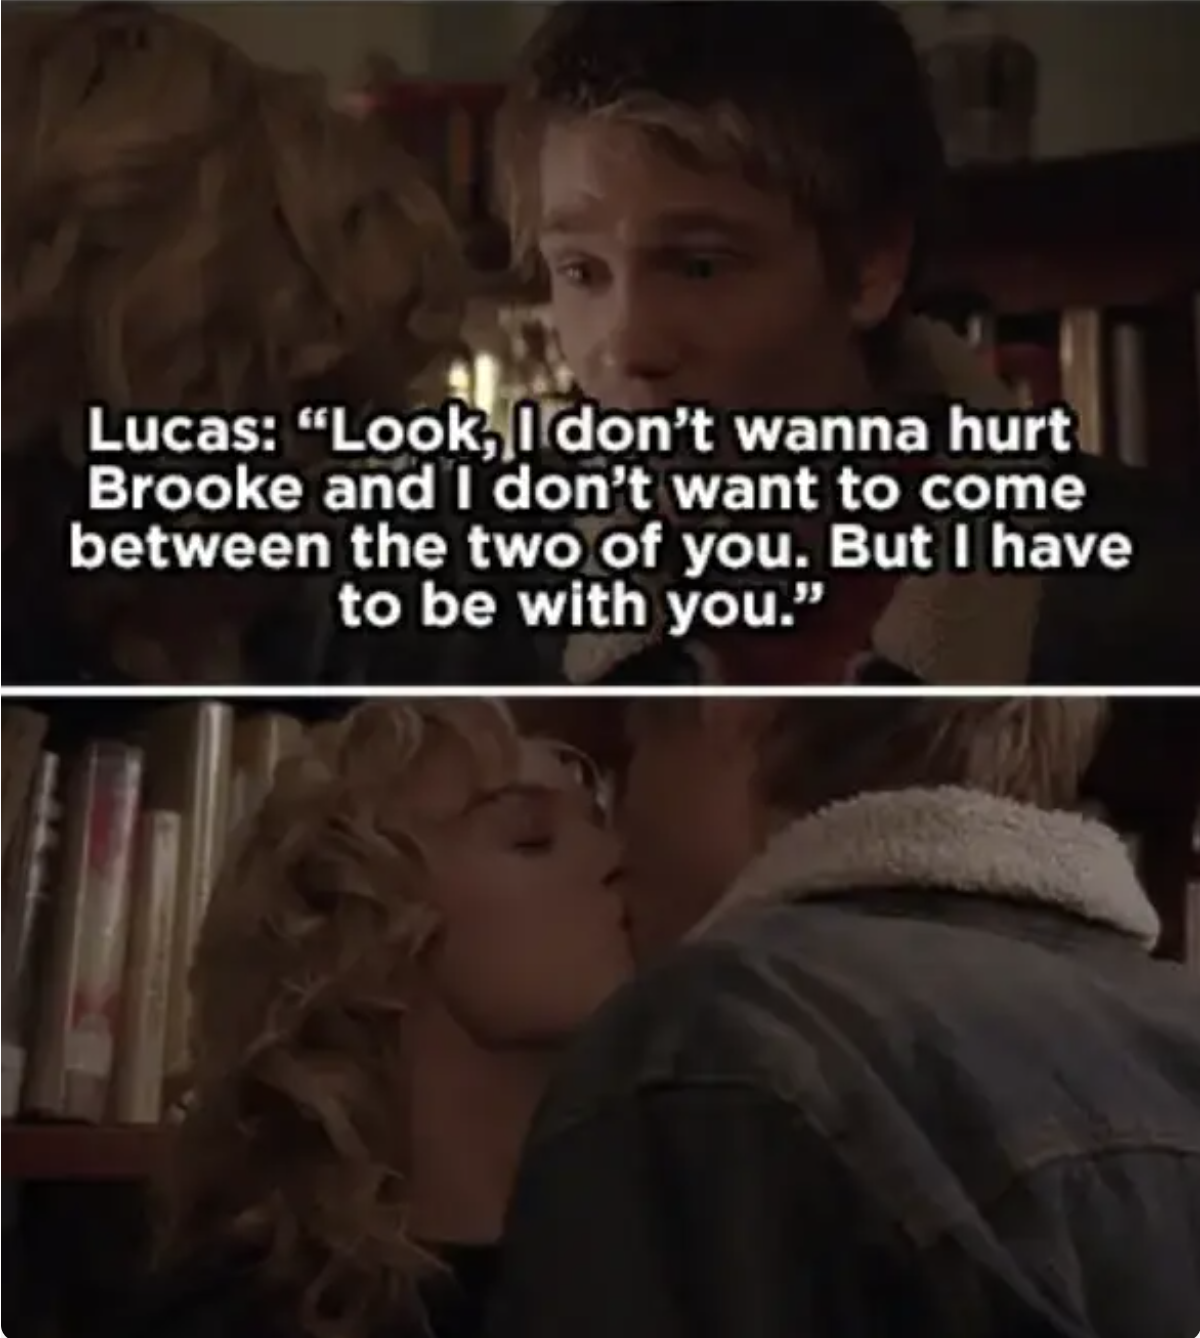 Lucas says he doesn&#x27;t want to hurt Brooke or get between the two of them but he has to be with Peyton, they resume making out